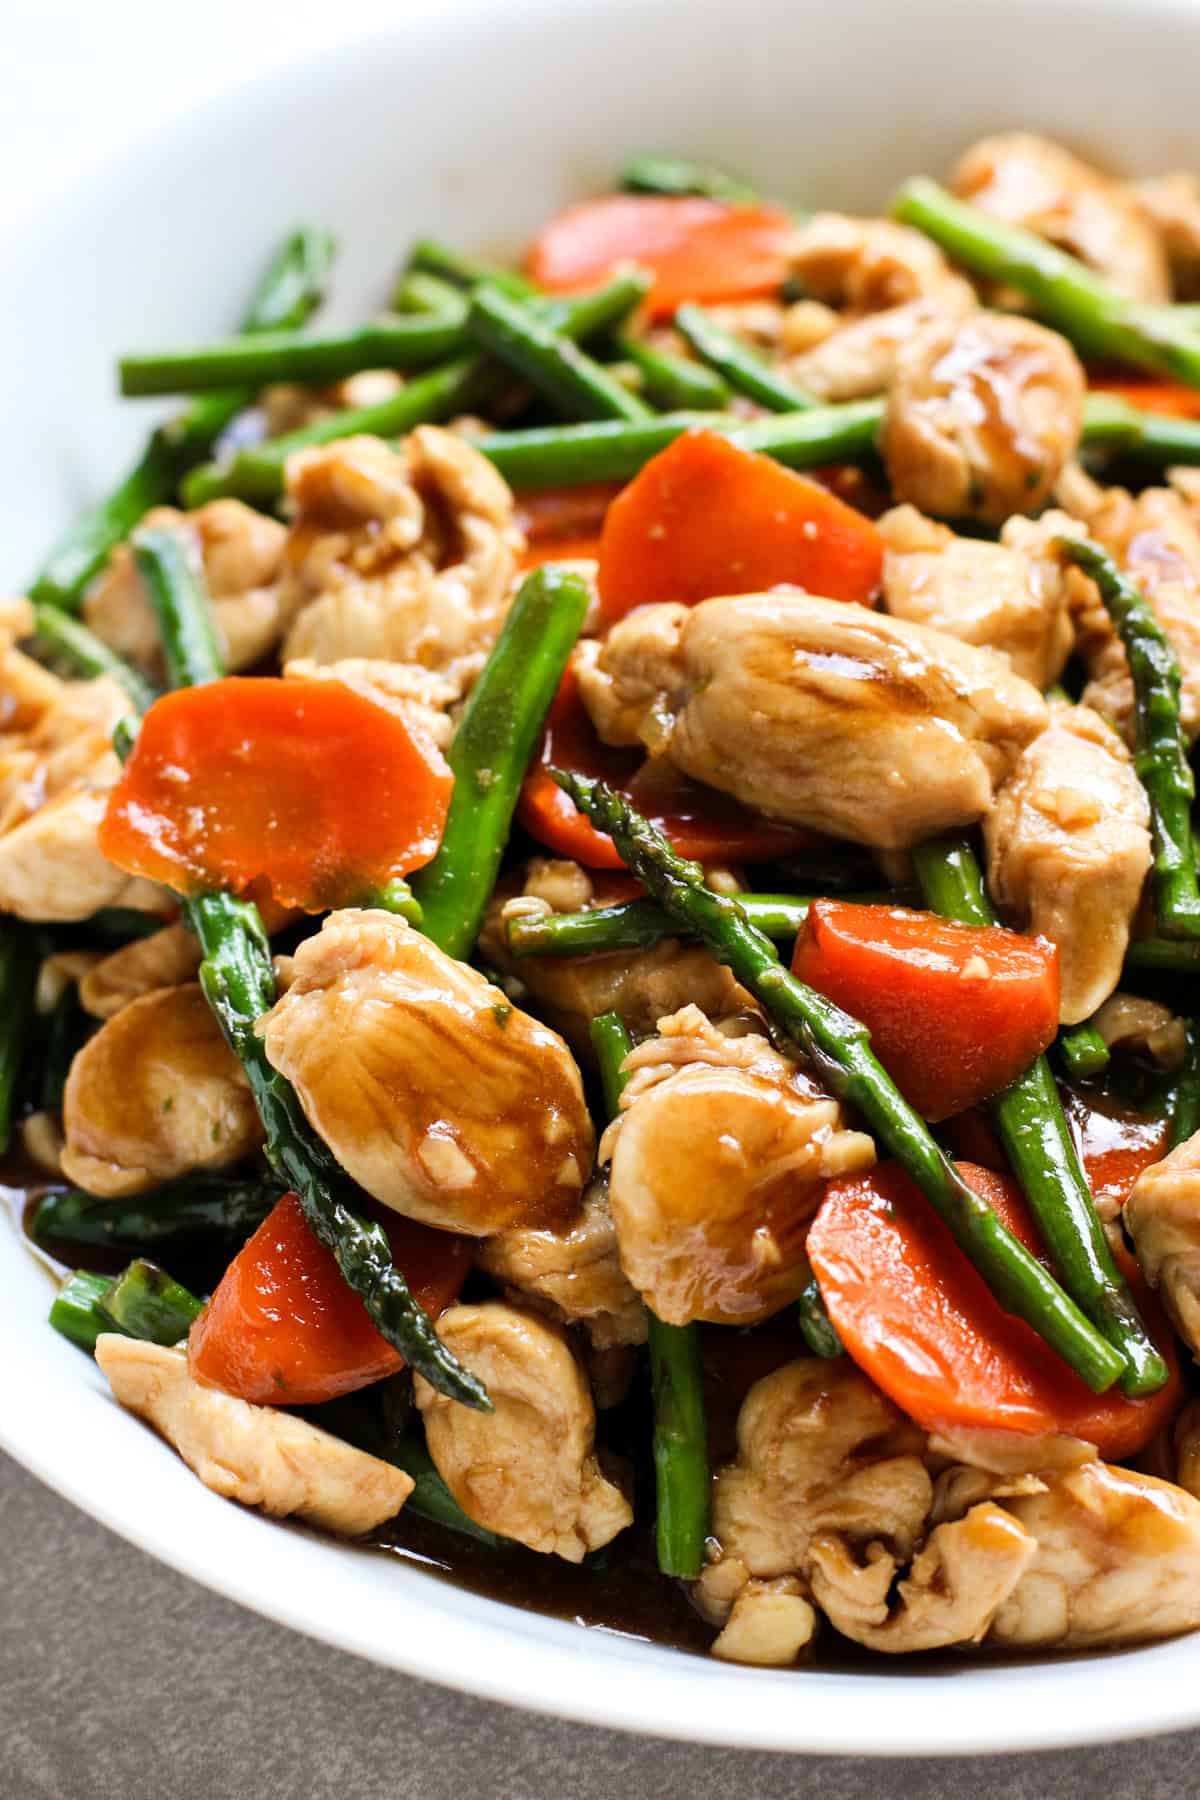 Chicken stir fried with asparagus and carrots